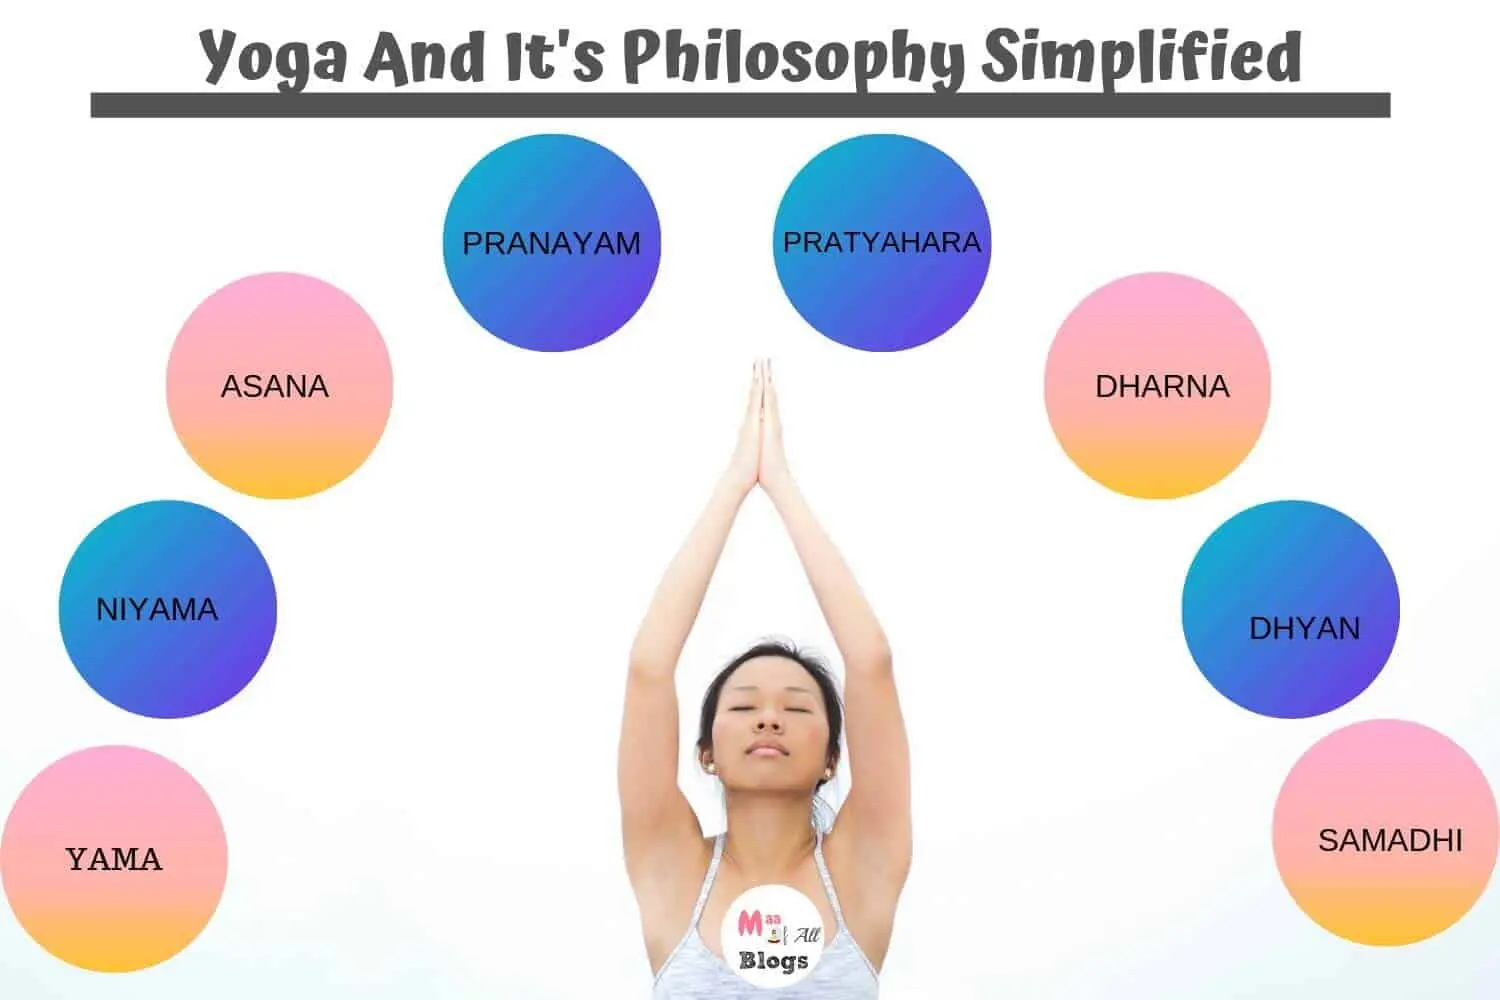 yoga indian philosophy - What is the philosophy of yoga simplified